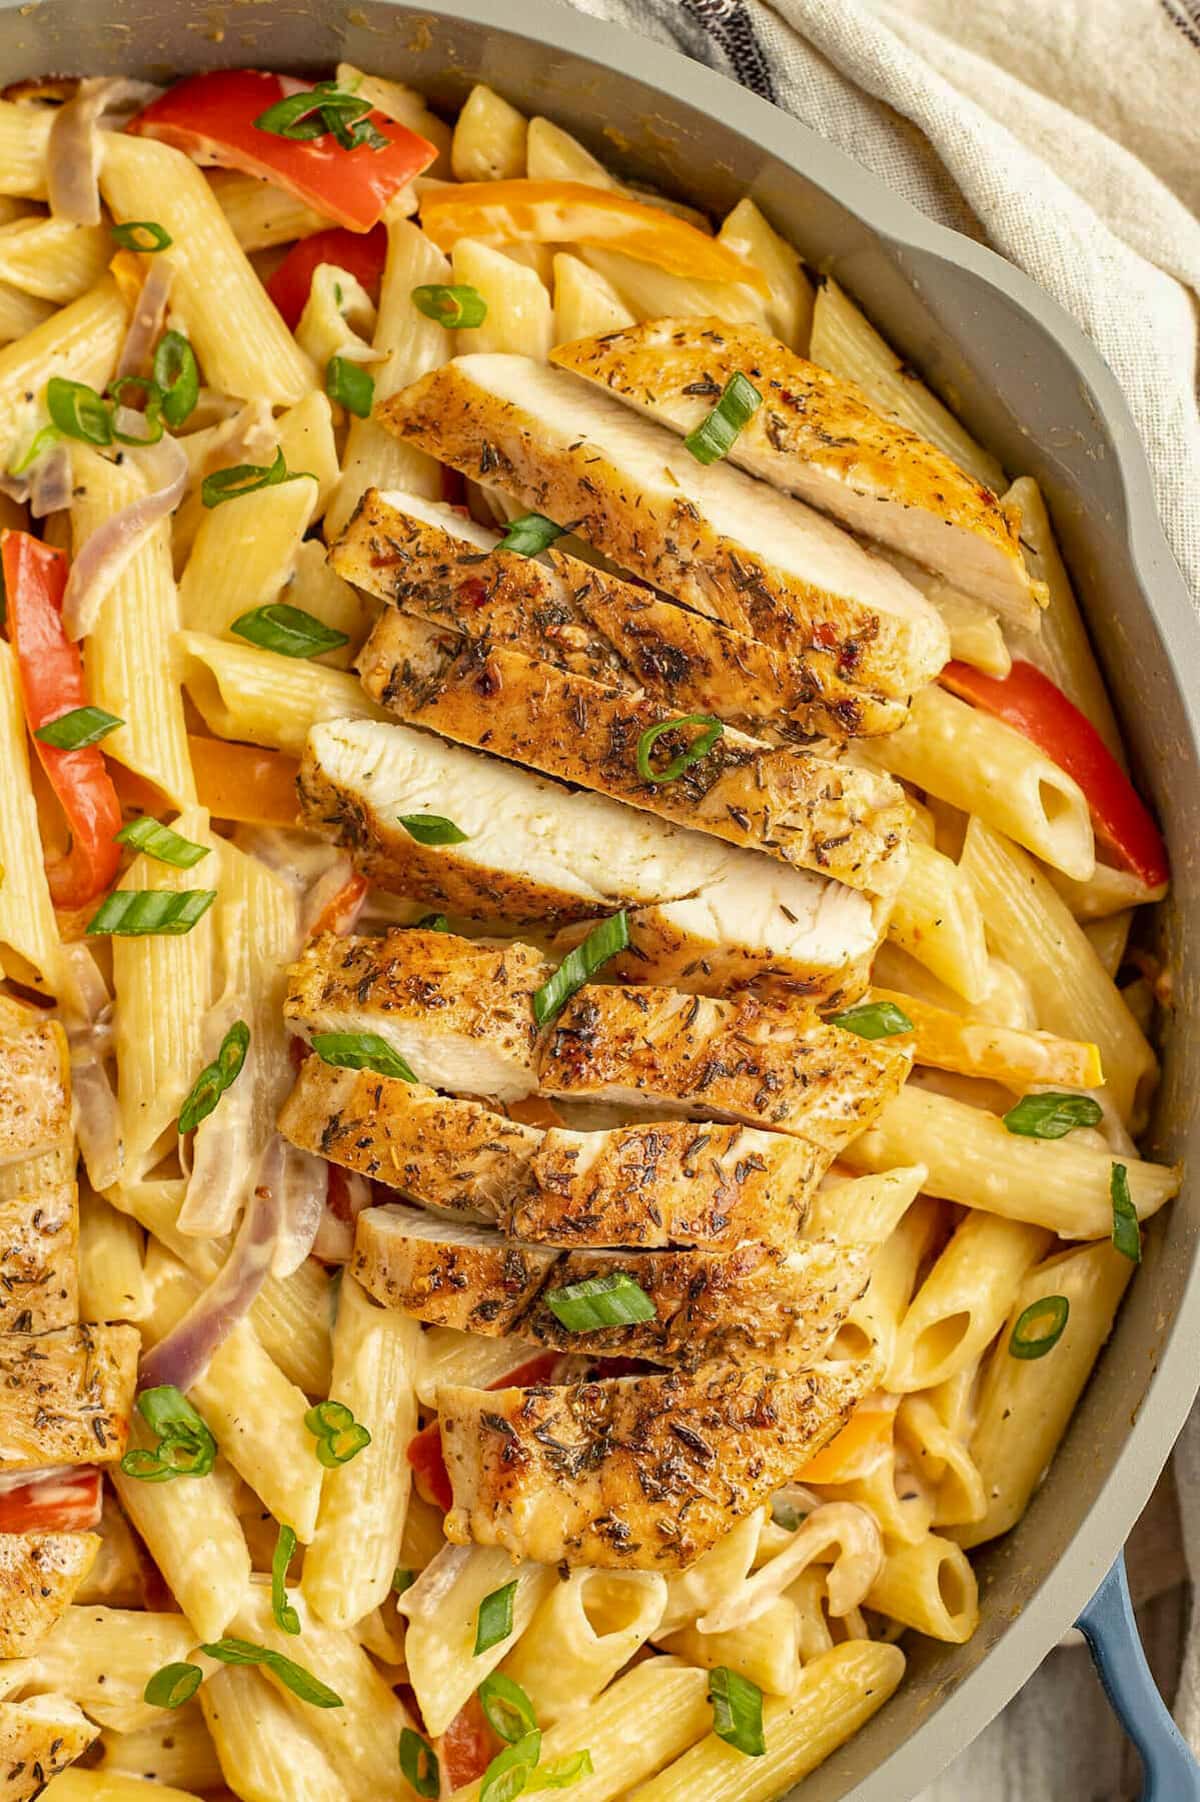 Jerk chicken pasta in a large skillet with fresh herbs, red tomato, and creamy penne.